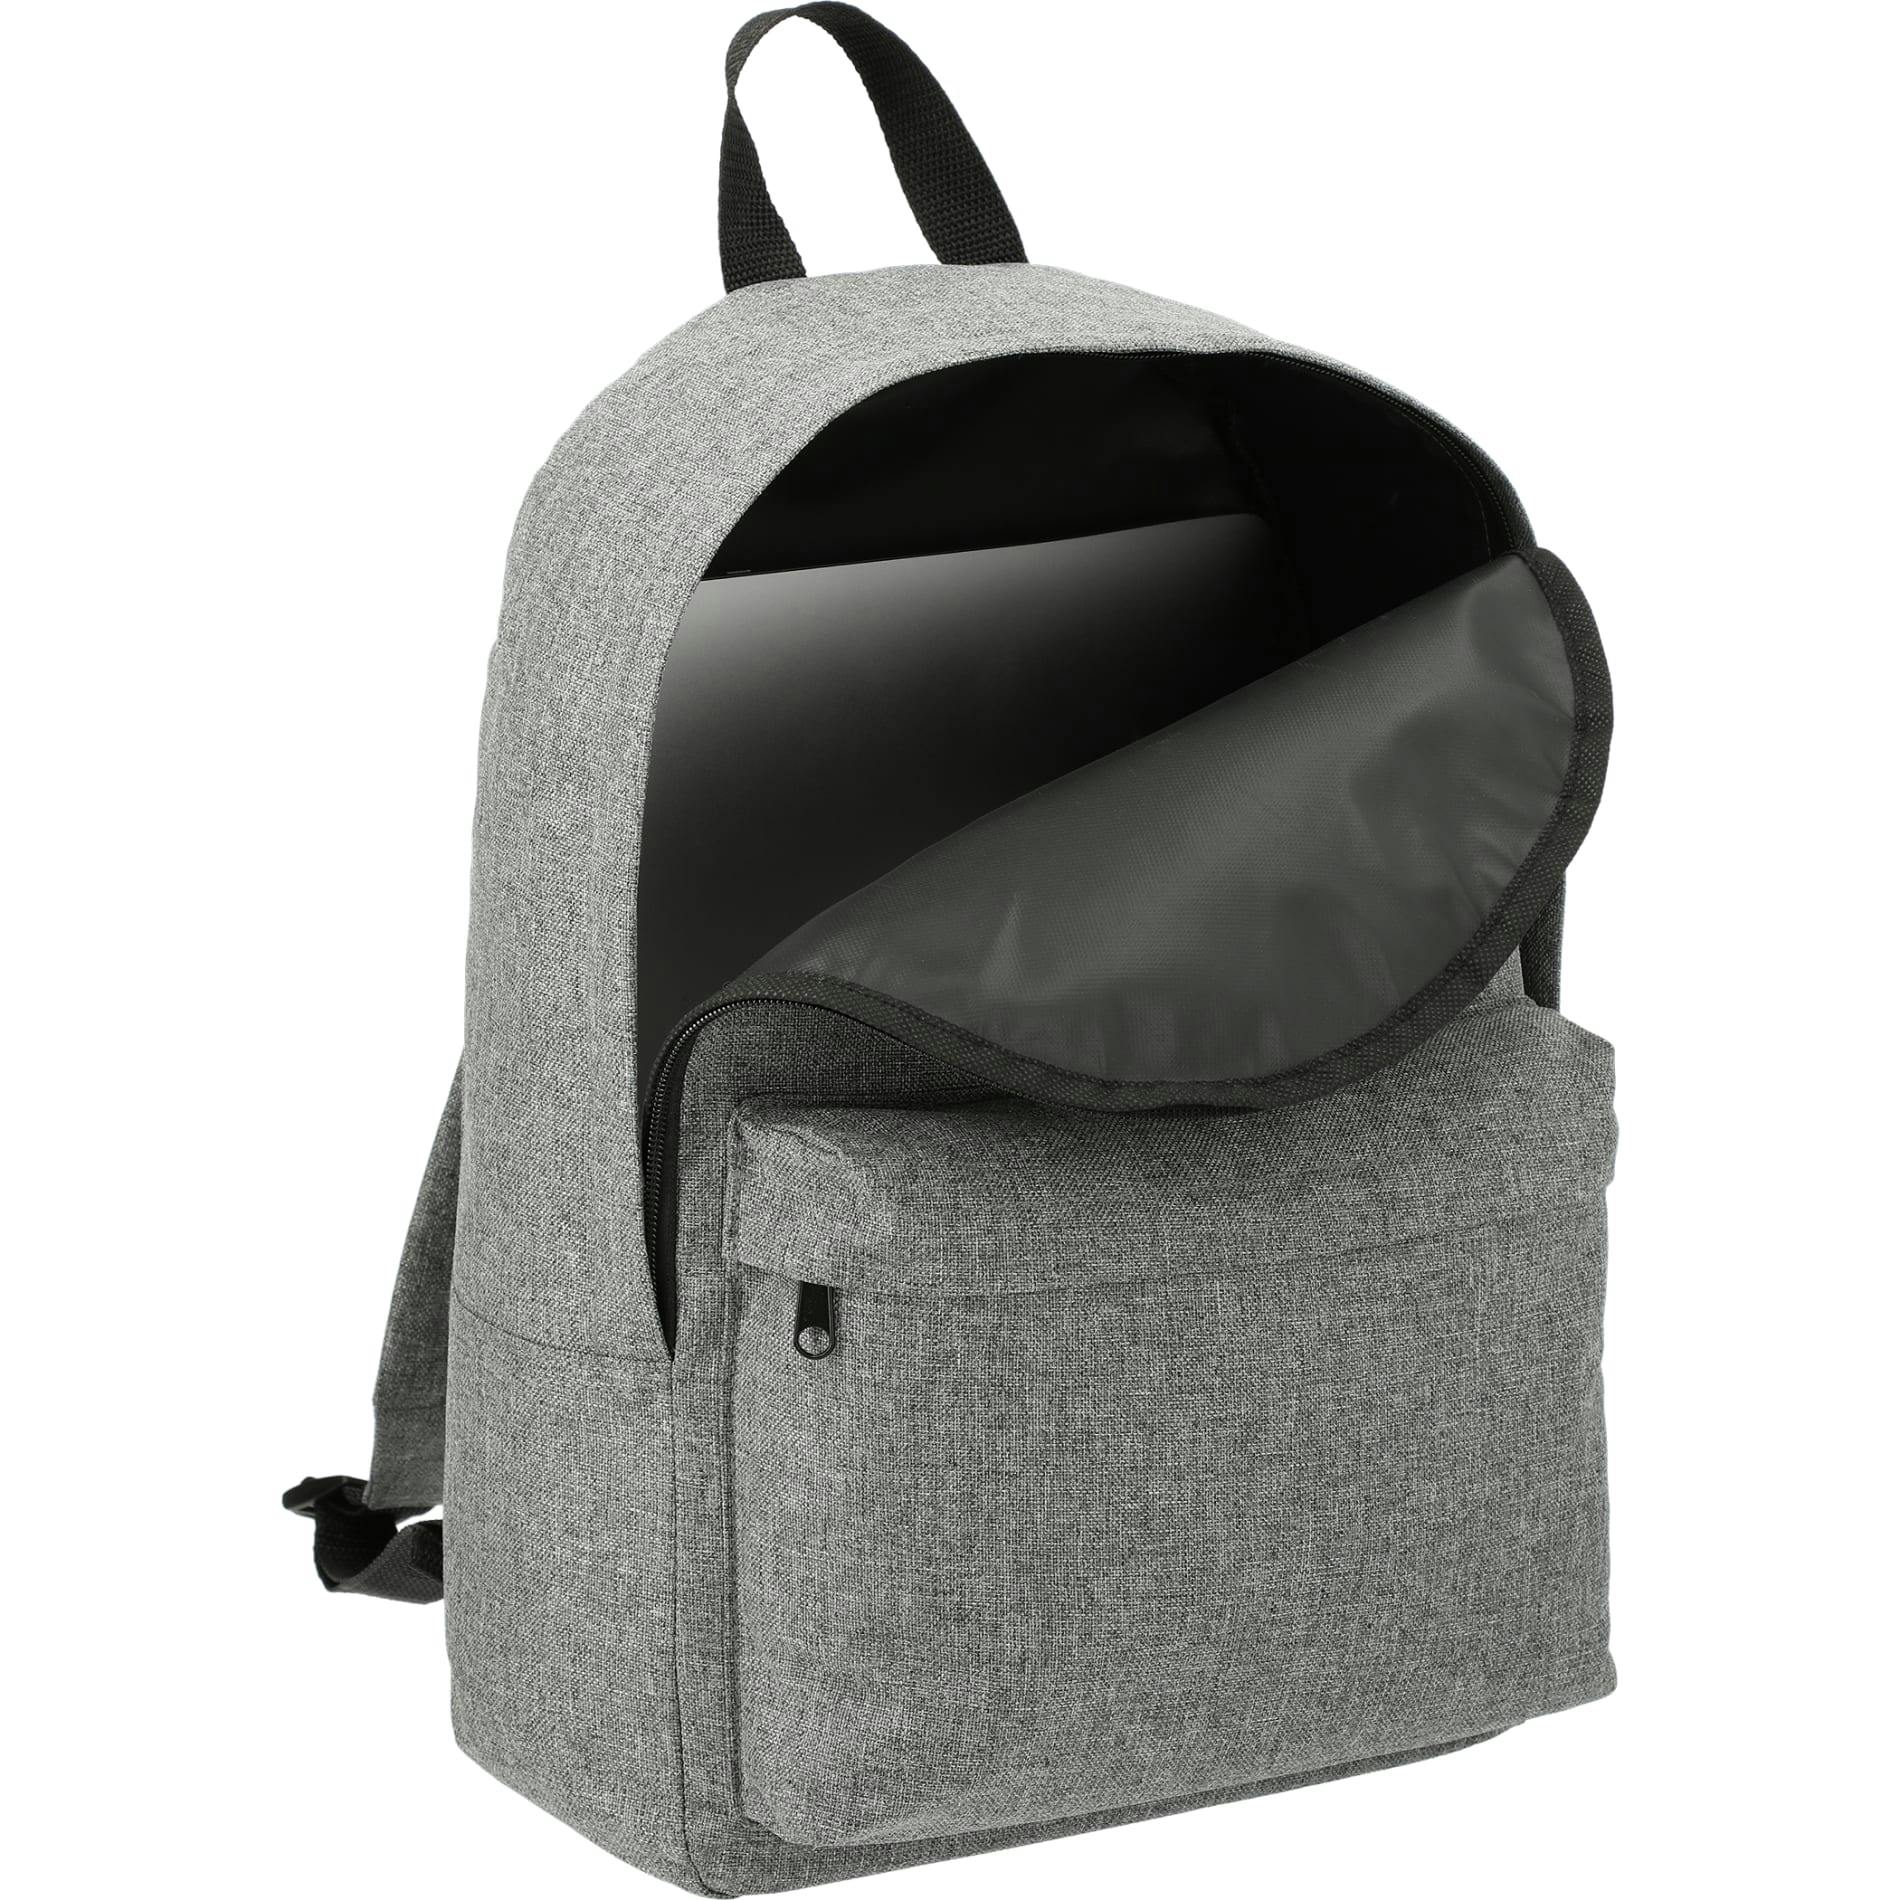 Reign Backpack - additional Image 2